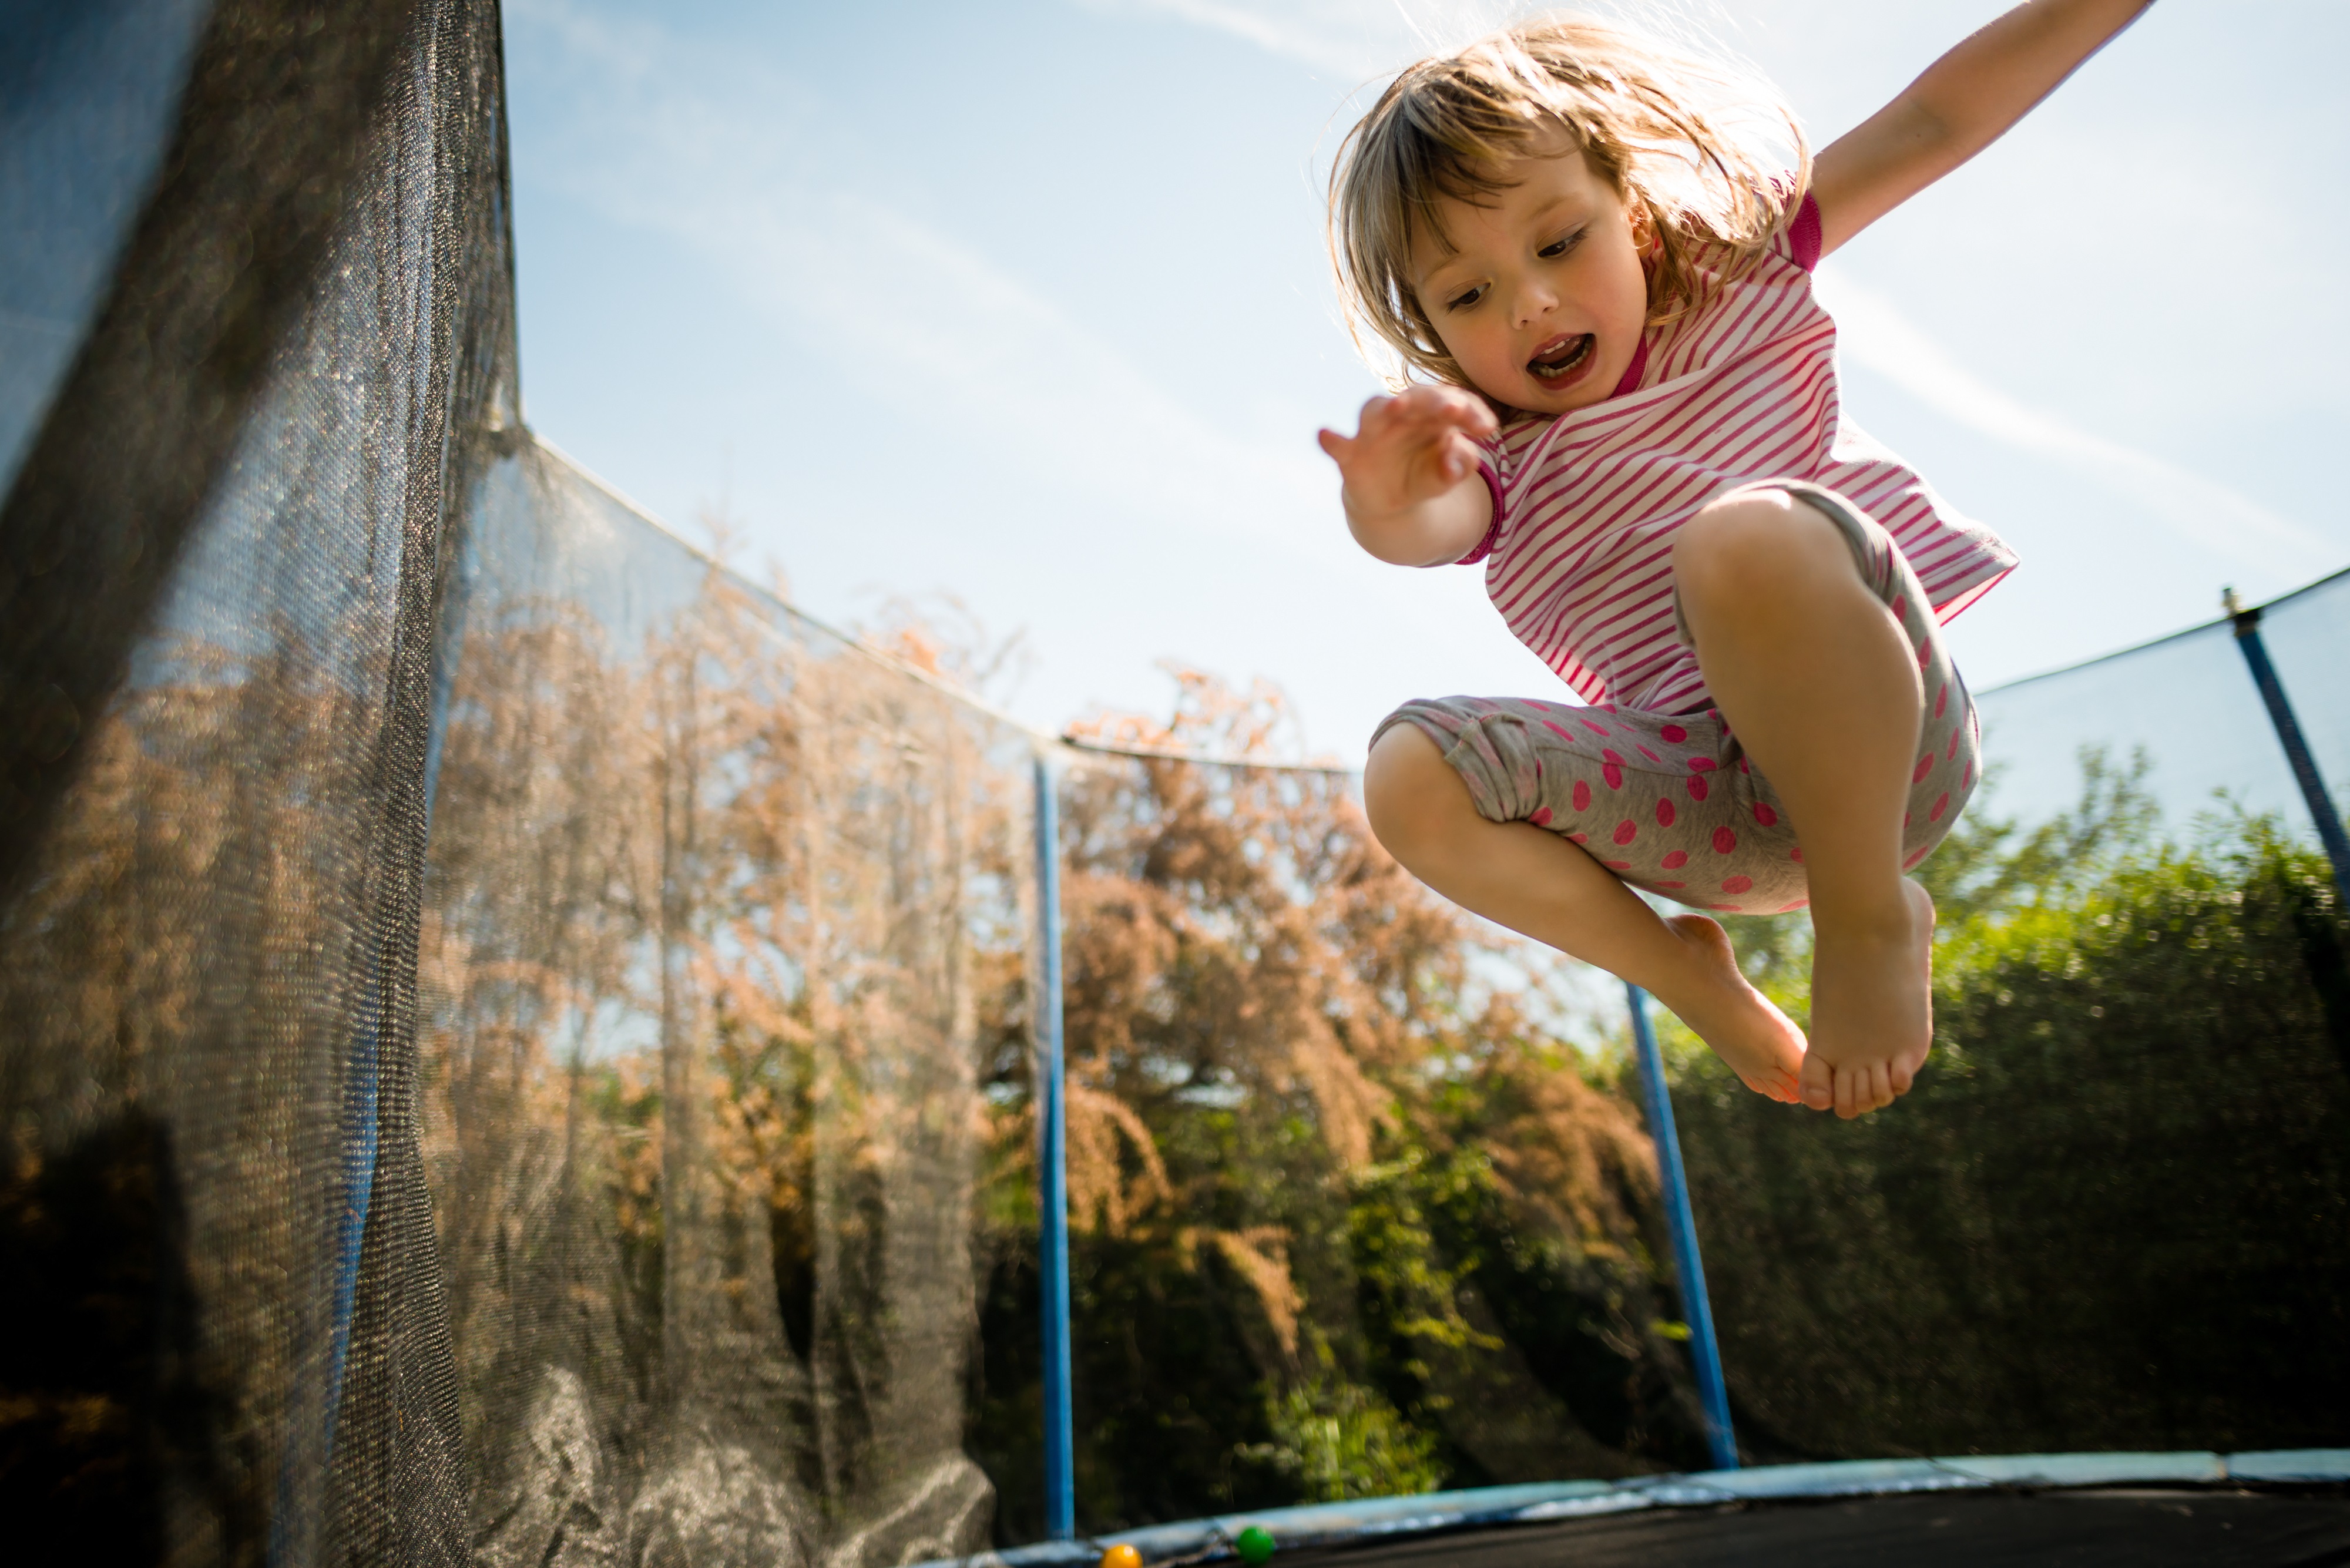 little girl jumping on trampoline fresh perspective landscapes get outside and play landscape construction